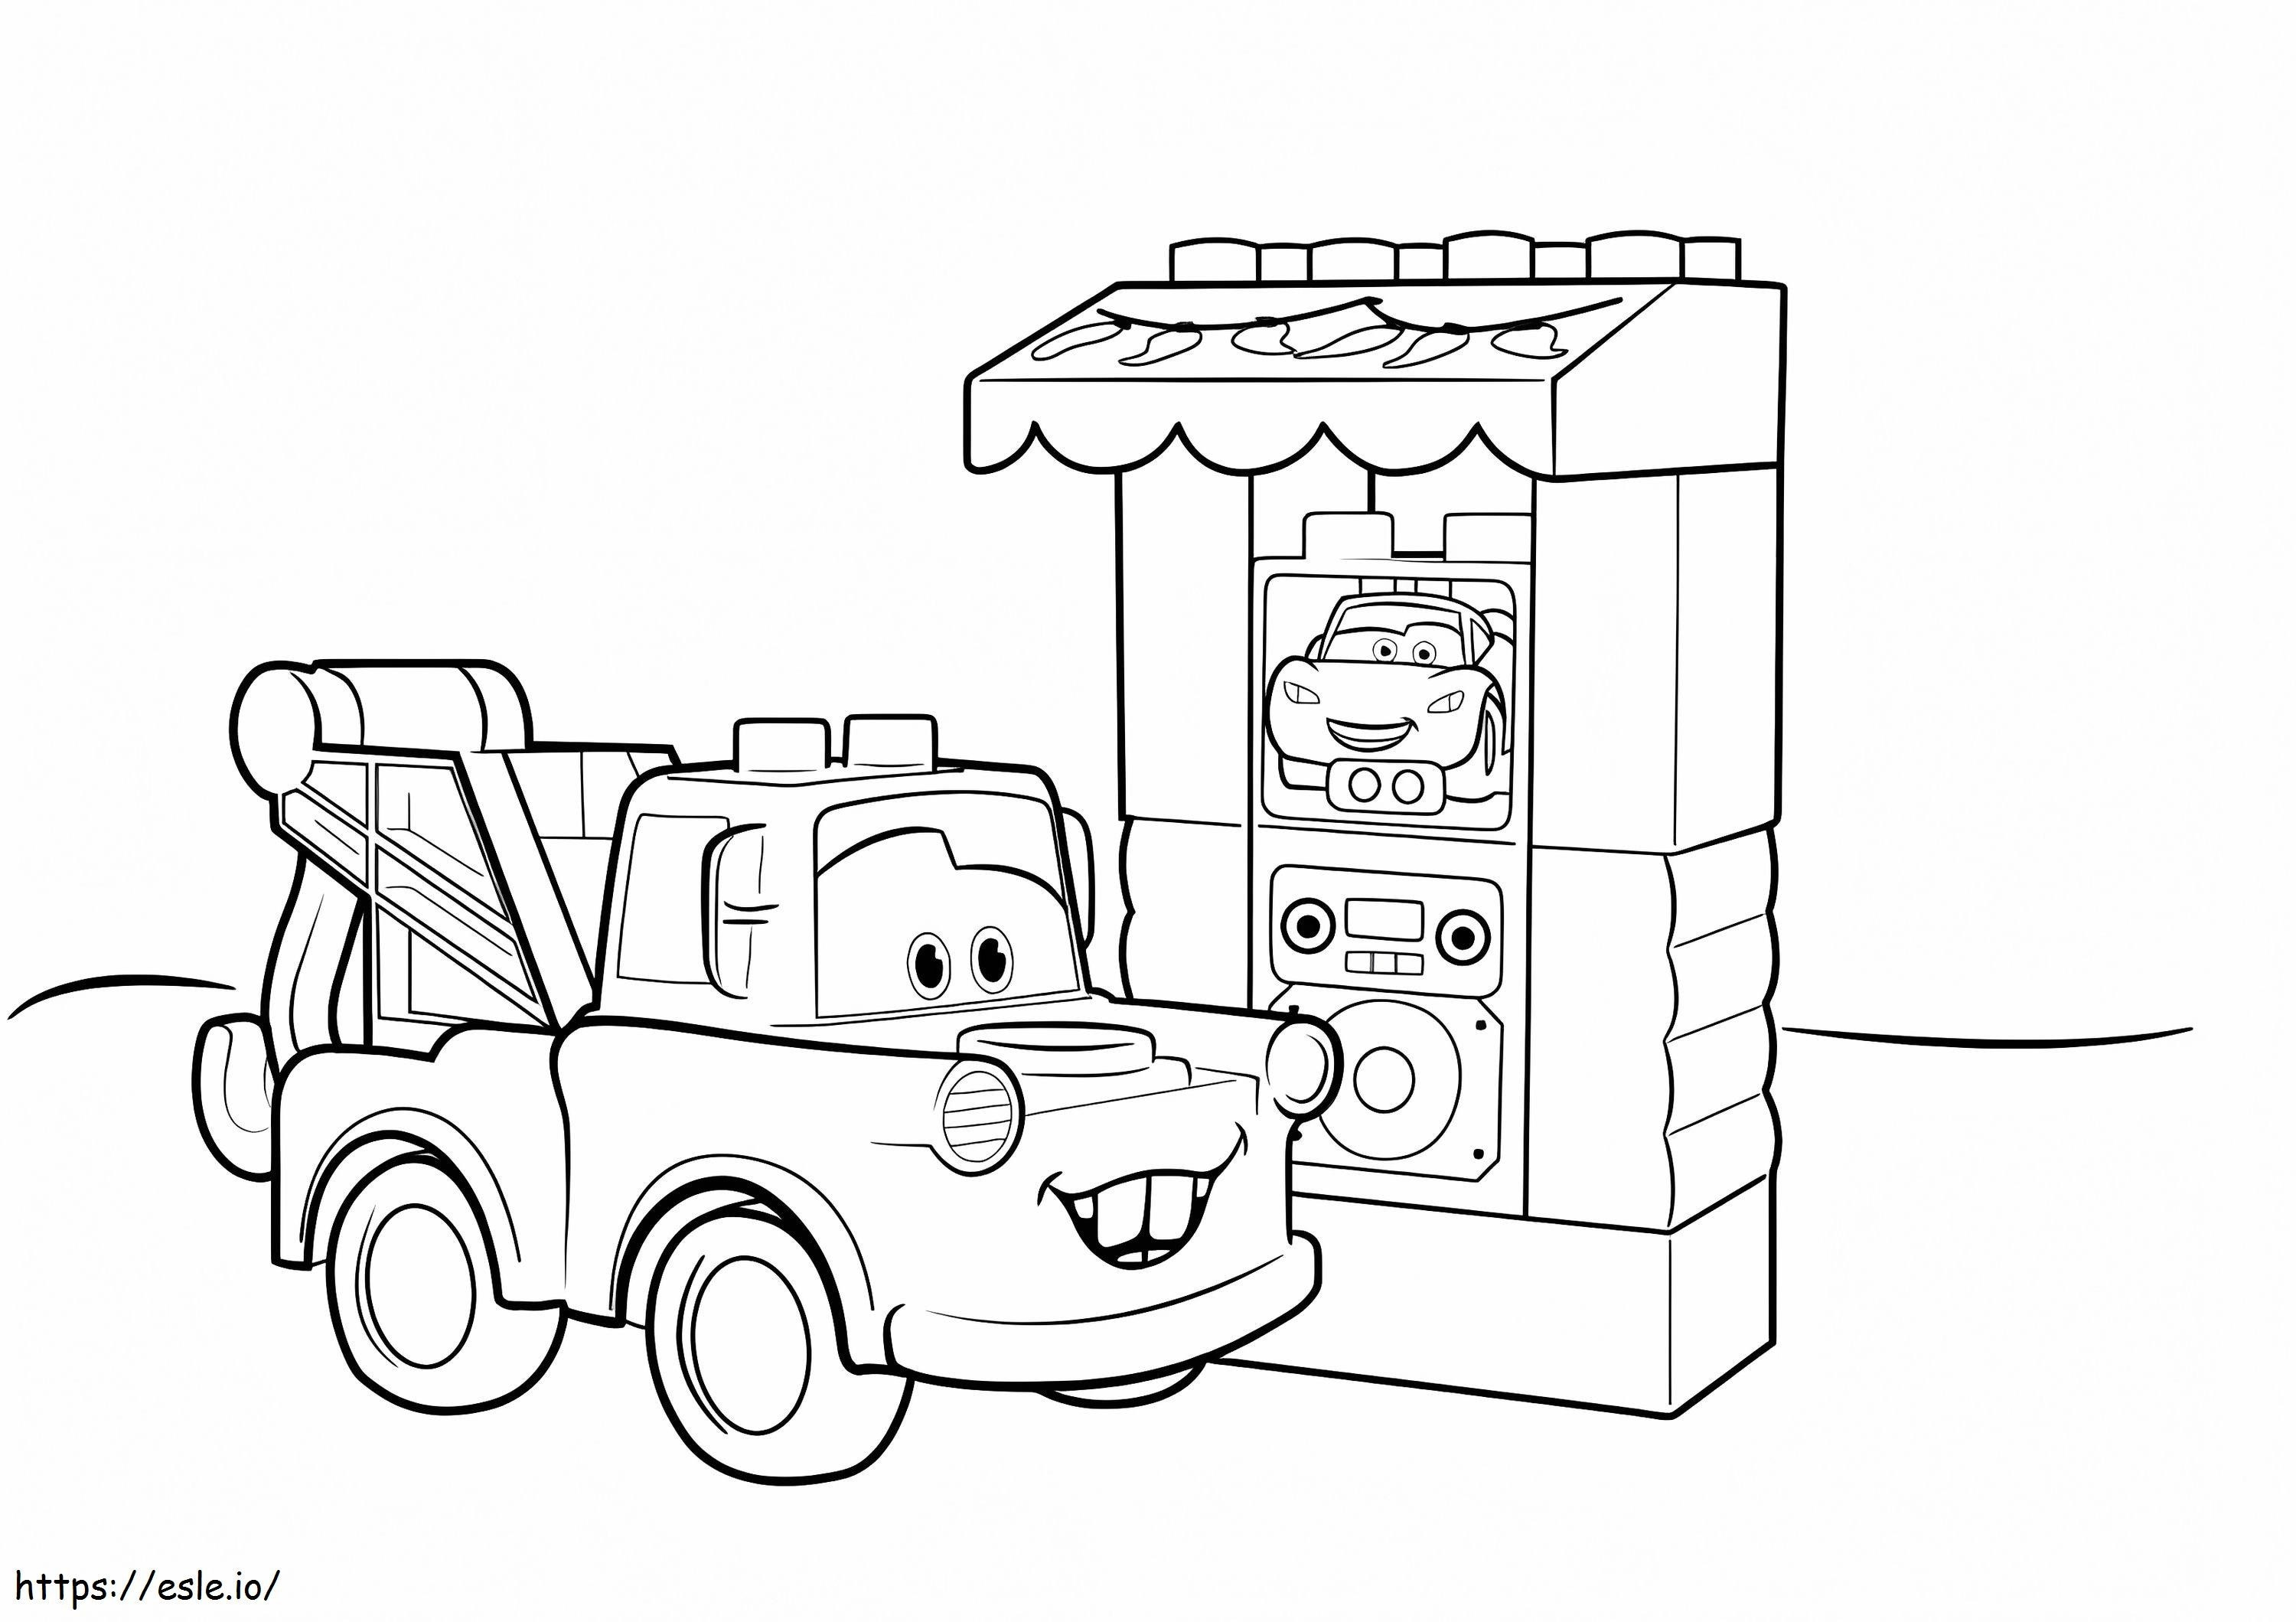 Cars 3 Mater Lego Duplo coloring page